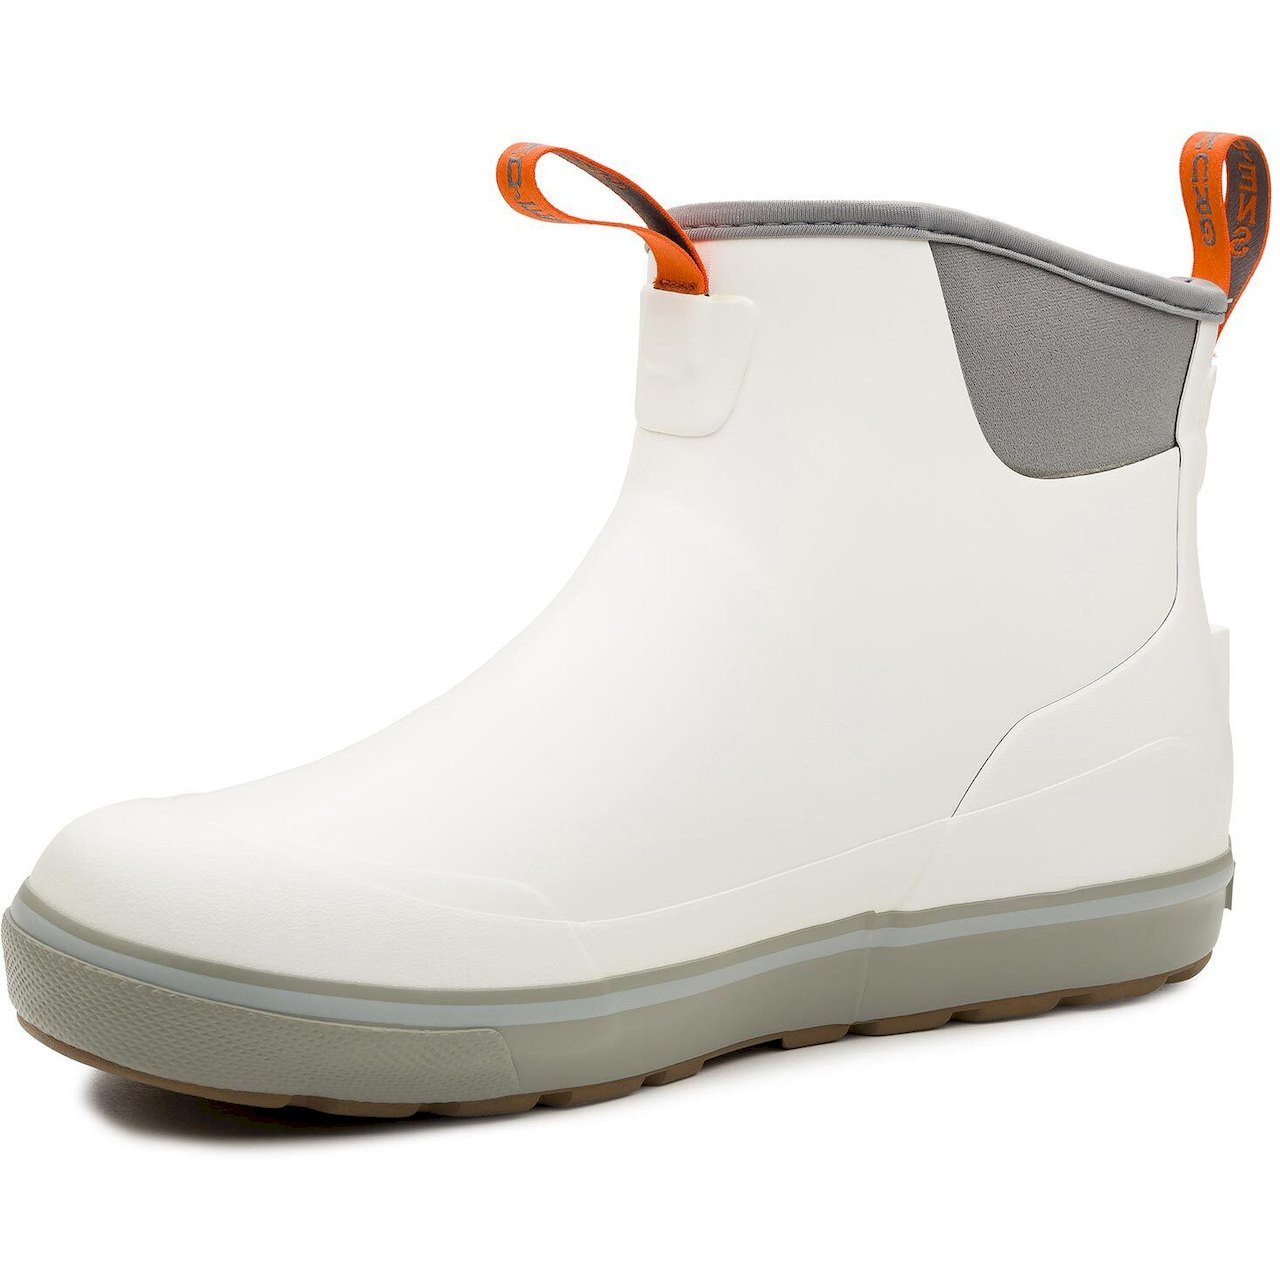 Grundens 60008 Deck-Boss Ankle Boots WhiteSquall